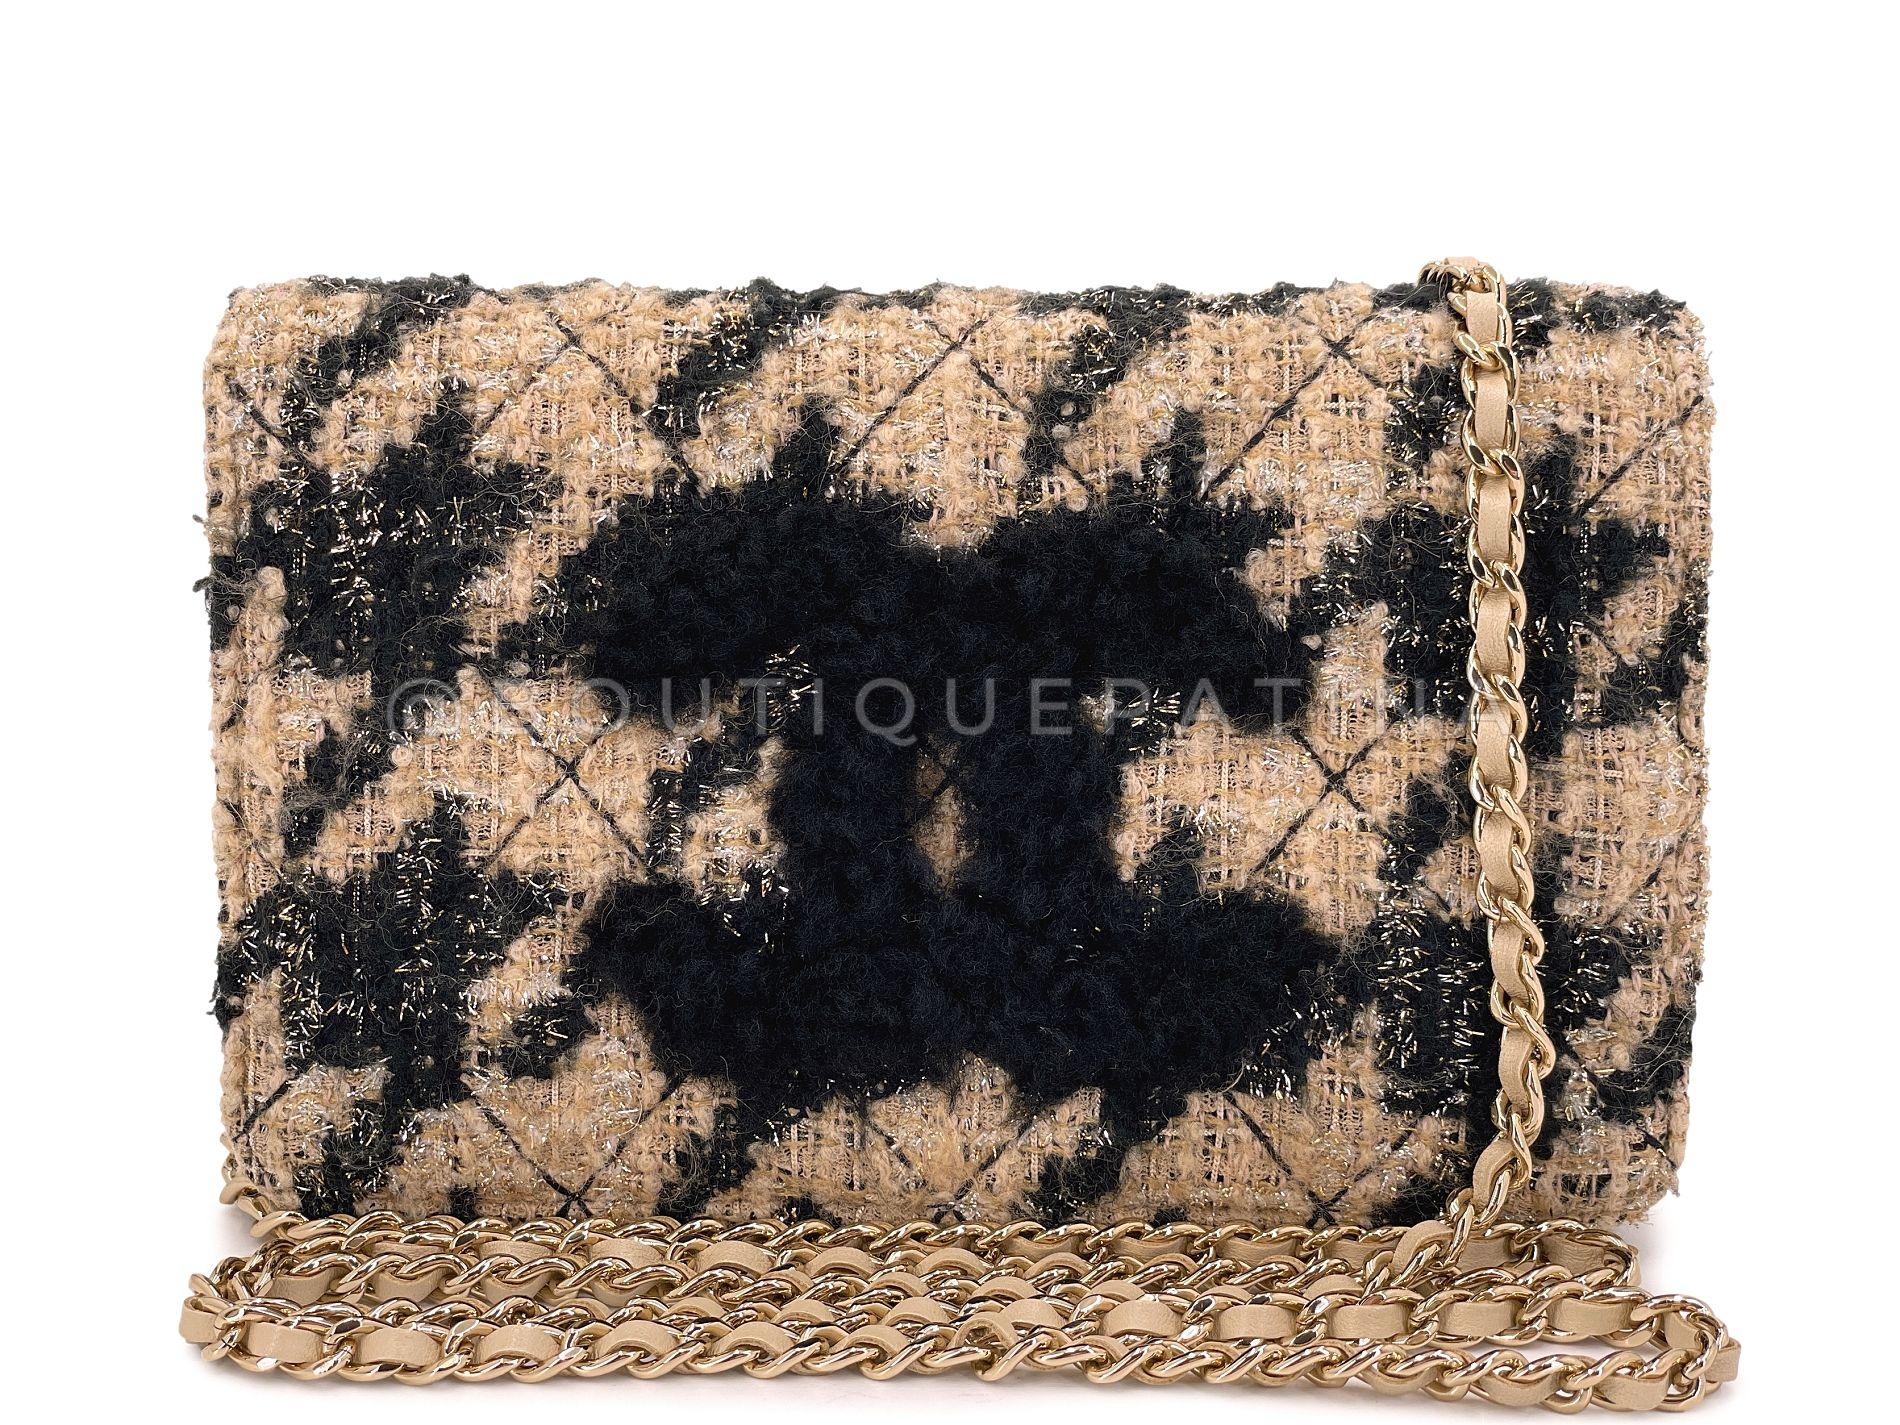 Store item: 68024
The WOC is a must-have Chanel due to its chic style and extreme versatility. The long 24-inch woven silver chain can be worn single across the body, double on the shoulder, triple as a hand purse or inside the bag, as a clutch.